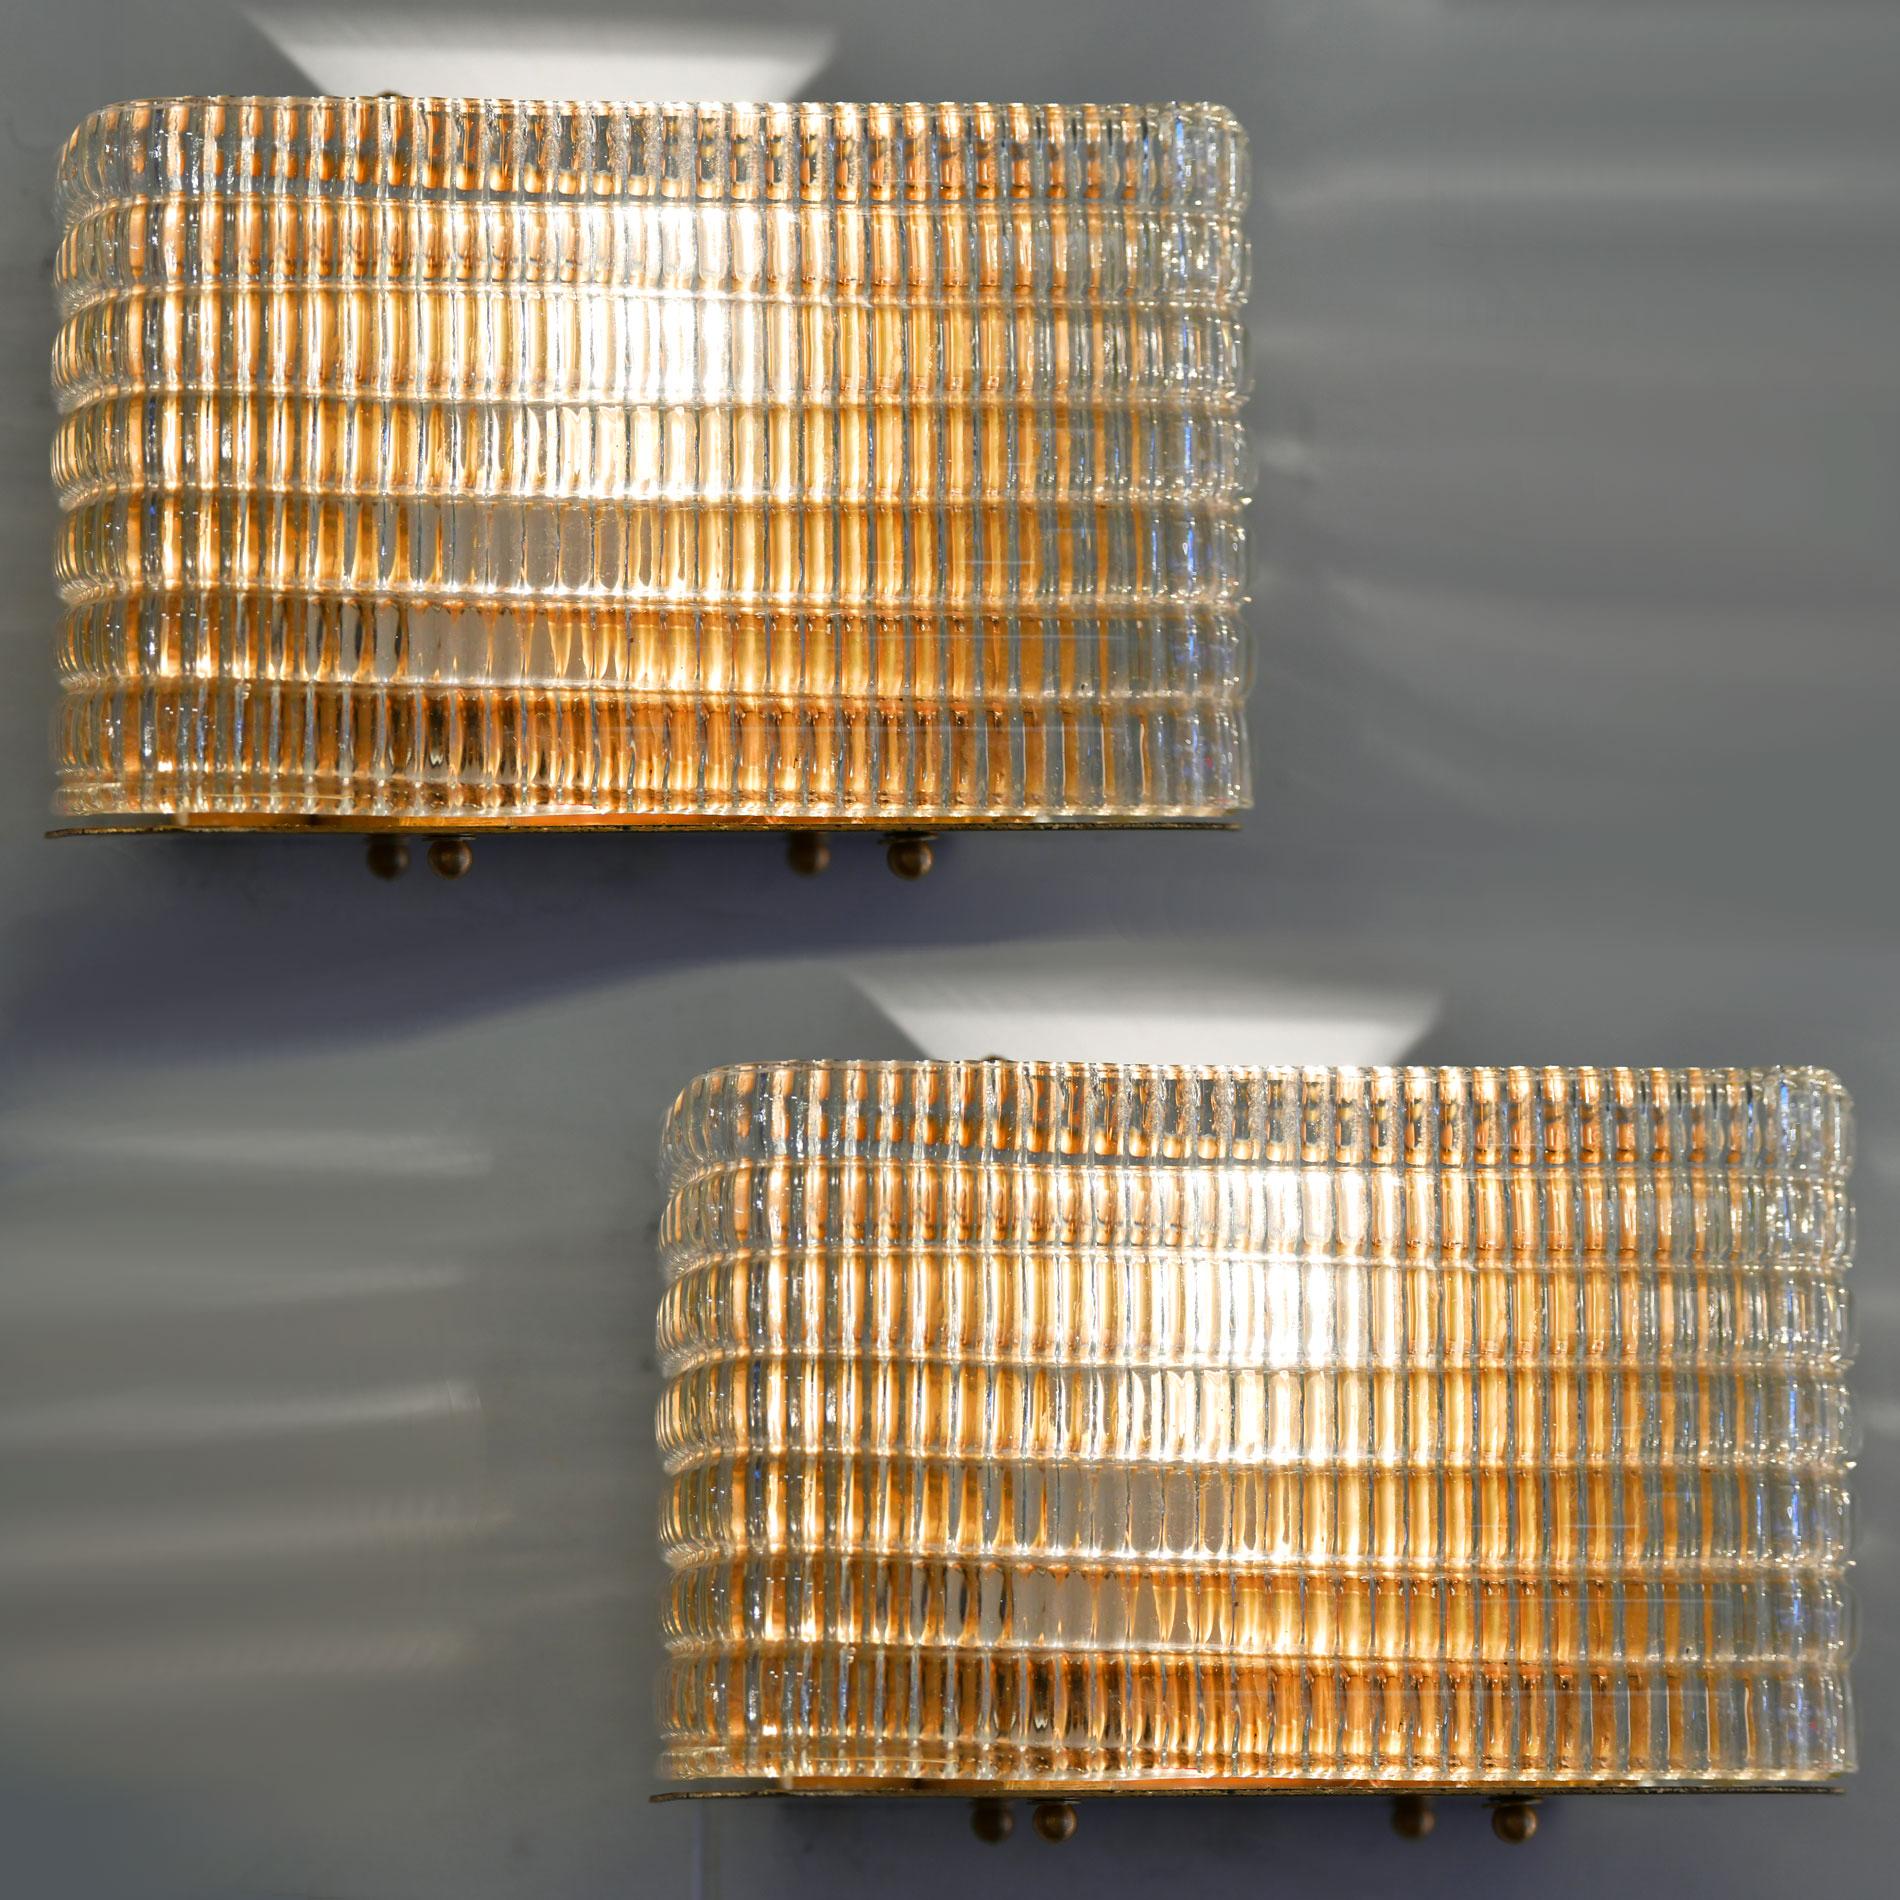 Glamorous wall light with curved corners. Six layers of textured glass, the vertical ribbing effect is on the inside whilst the outside is horizontal shape in layers. The overall effect of the glass alongside the reflection of the brass back plate